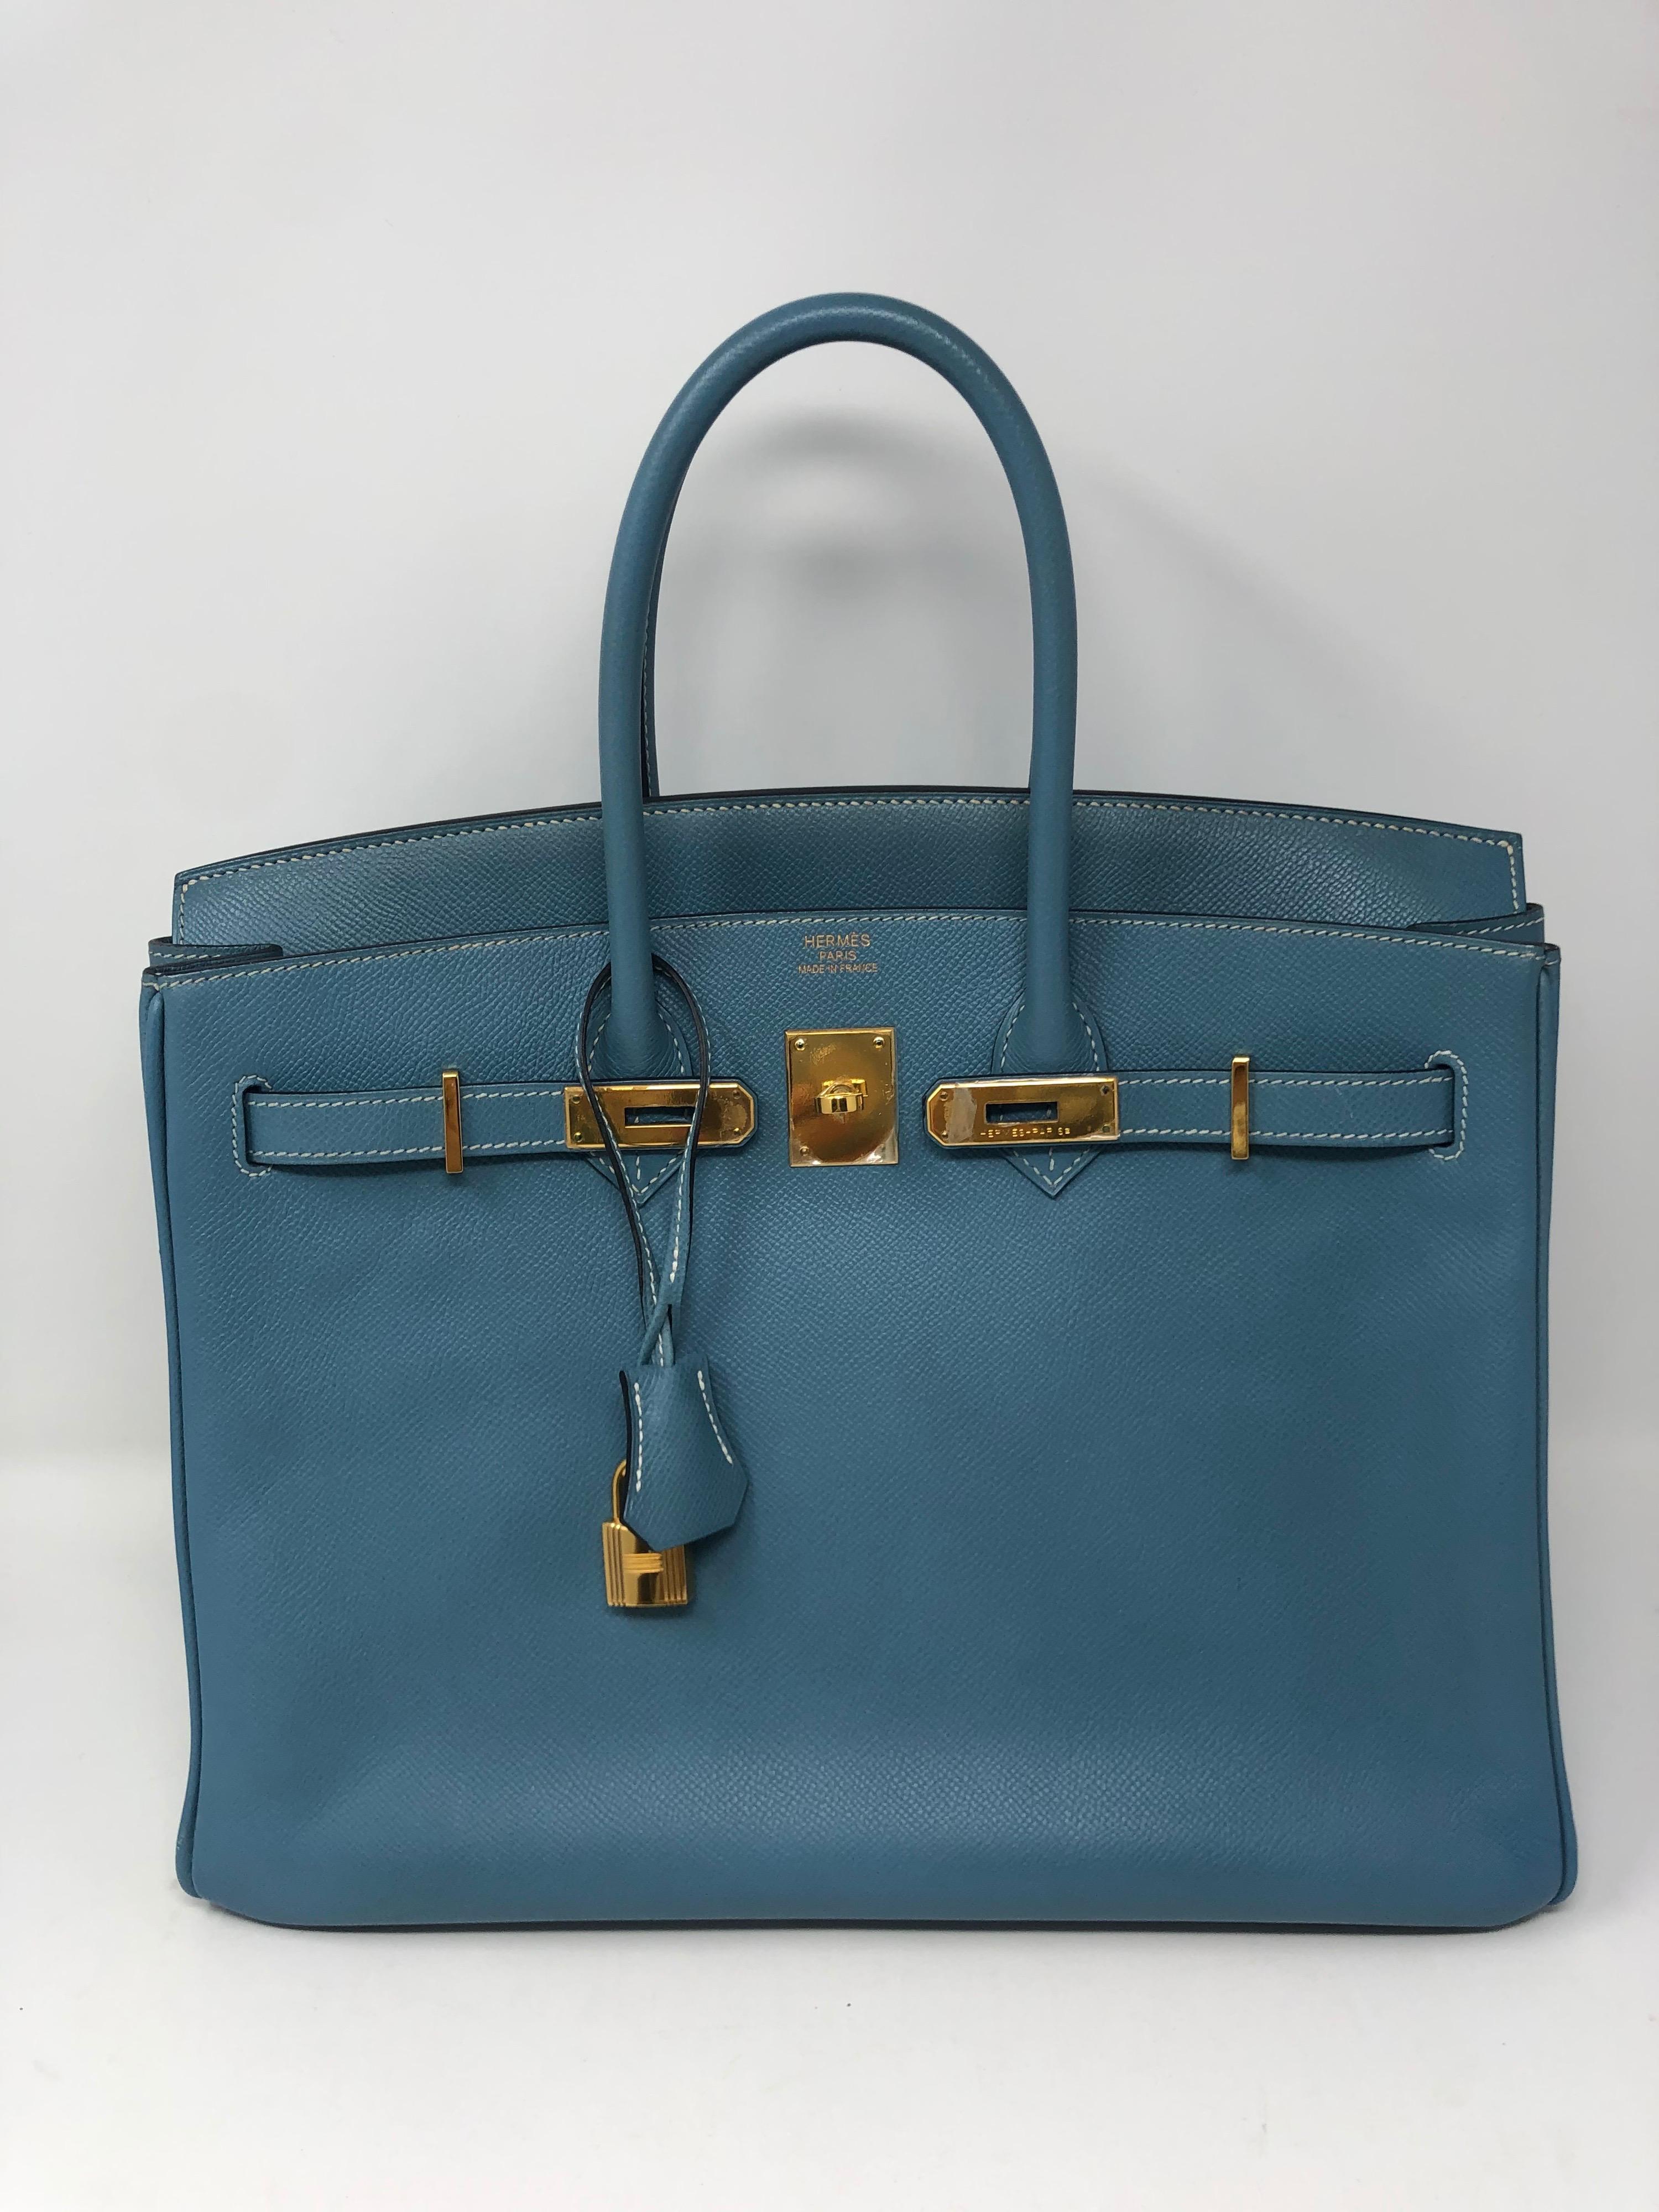 Hermes Blue Jean Birkin 35. Gold hardware. Excellent condition. Beautiful light blue color epsom leather. Great Spring or Summer bag. Can be worn all year round. Guaranteed authentic. 